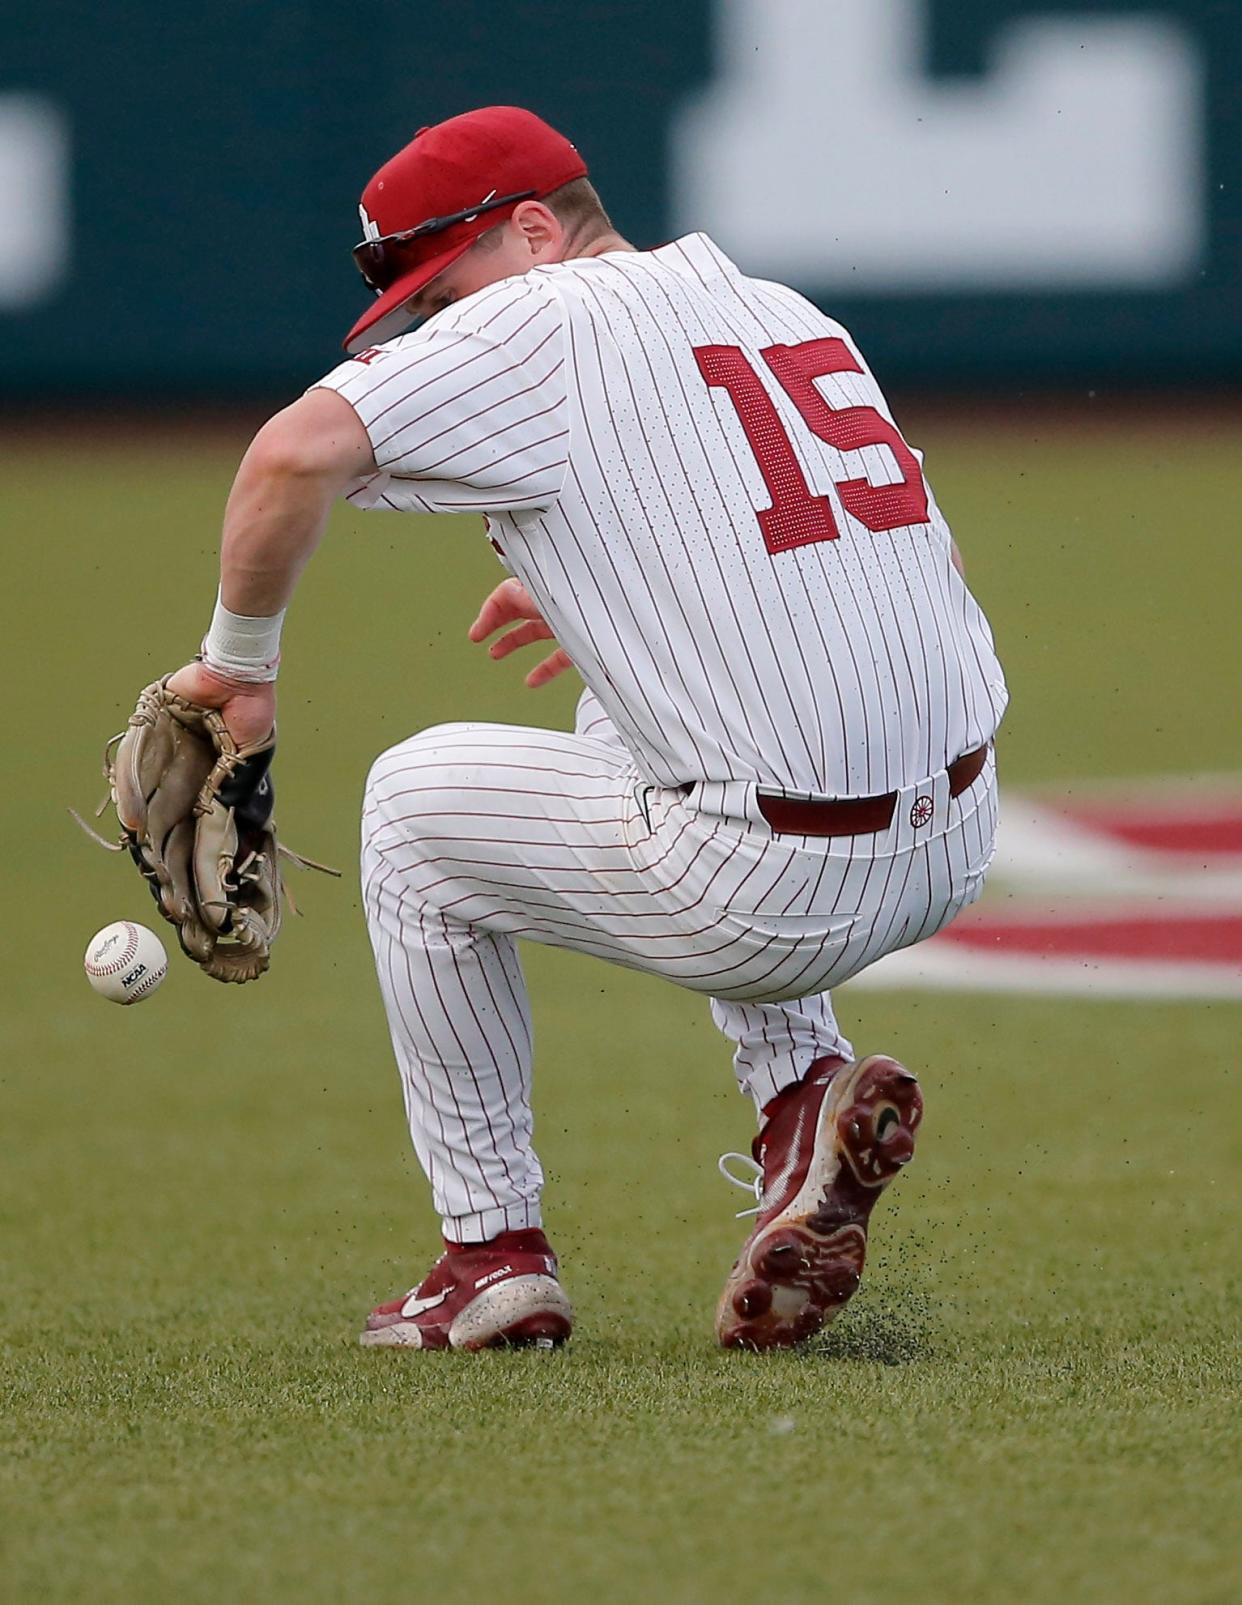 Oklahoma's Jackson Nicklaus (15) tries to field a ground ball during the Bedlam baseball game between the University of Oklahoma Sooners and the Oklahoma State University Cowboys at L. Dale Mitchell Park in Norman, Okla., Thursday, May, 18, 2023. 